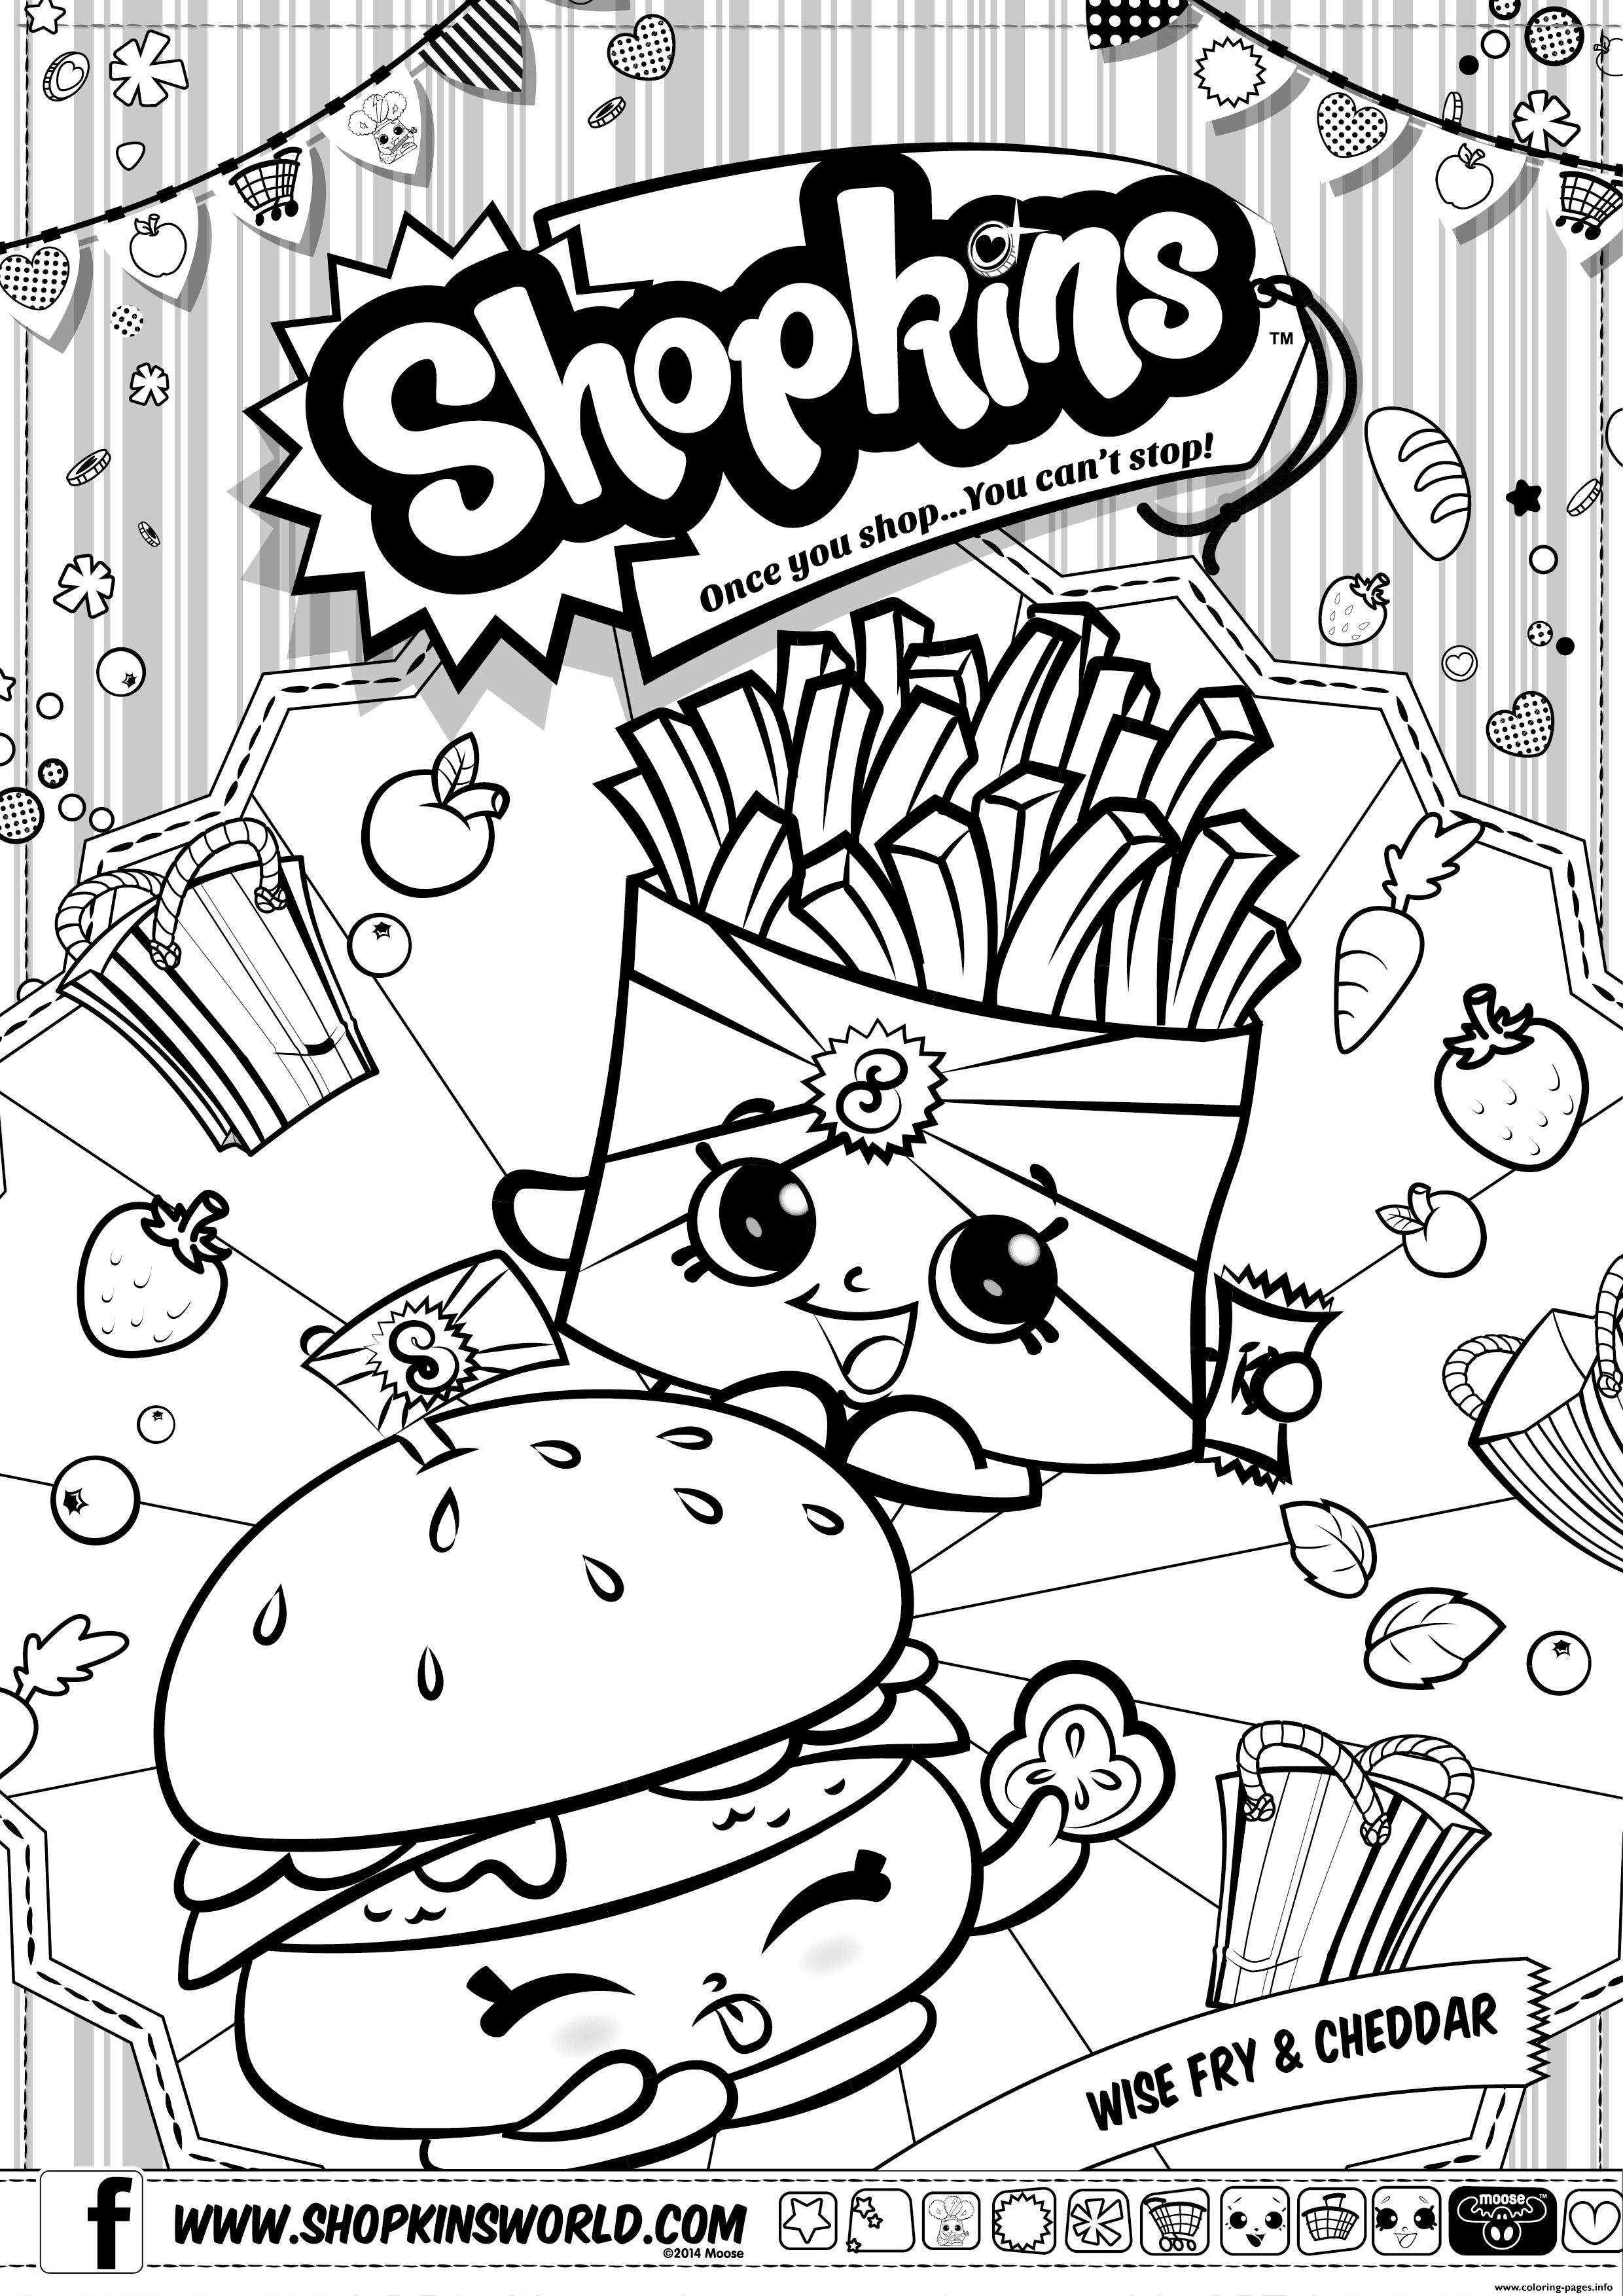 Shopkins Wise Fry Cheddar coloring